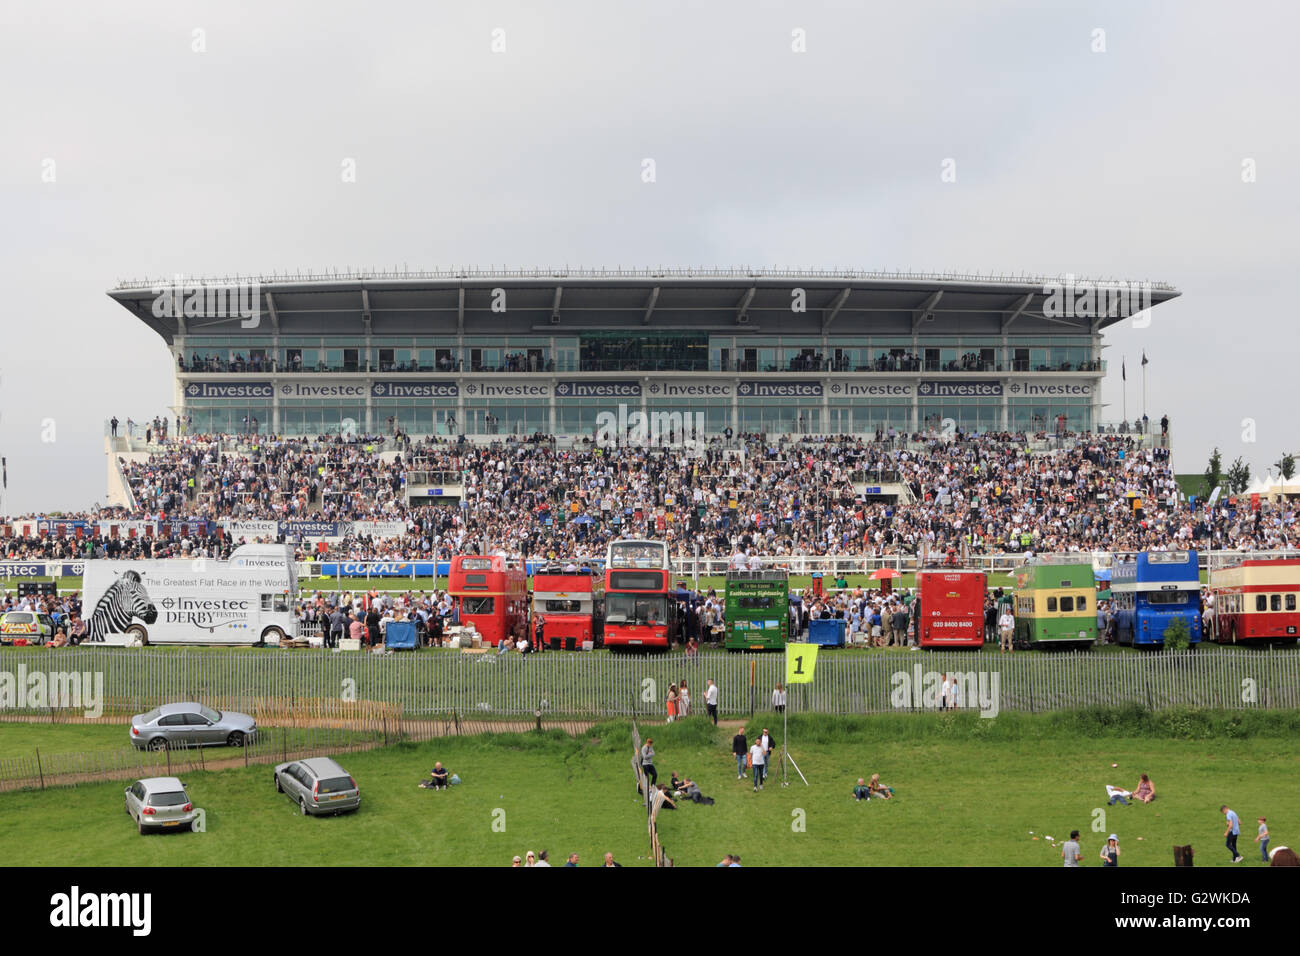 Epsom Downs, Surrey, England, UK. 4th June 2016. Open deck buses in front of the grandstand on Derby Day at Epsom Downs race course, where the world famous flat race the Investec Derby is the main race of the day. Stock Photo